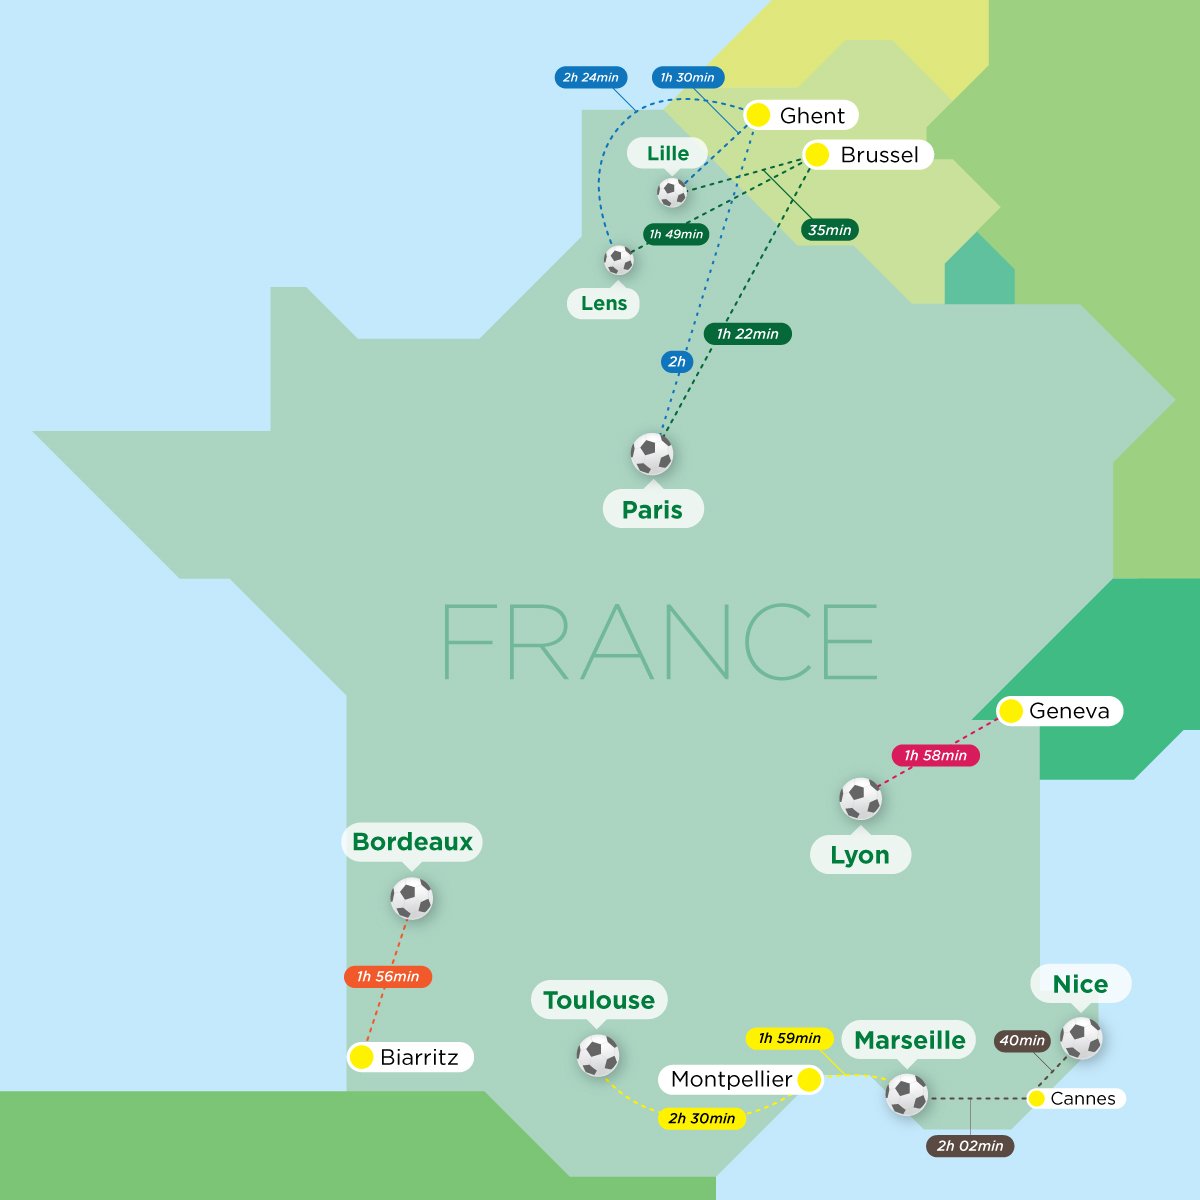 EURO 2016 - Alternative cities and distances